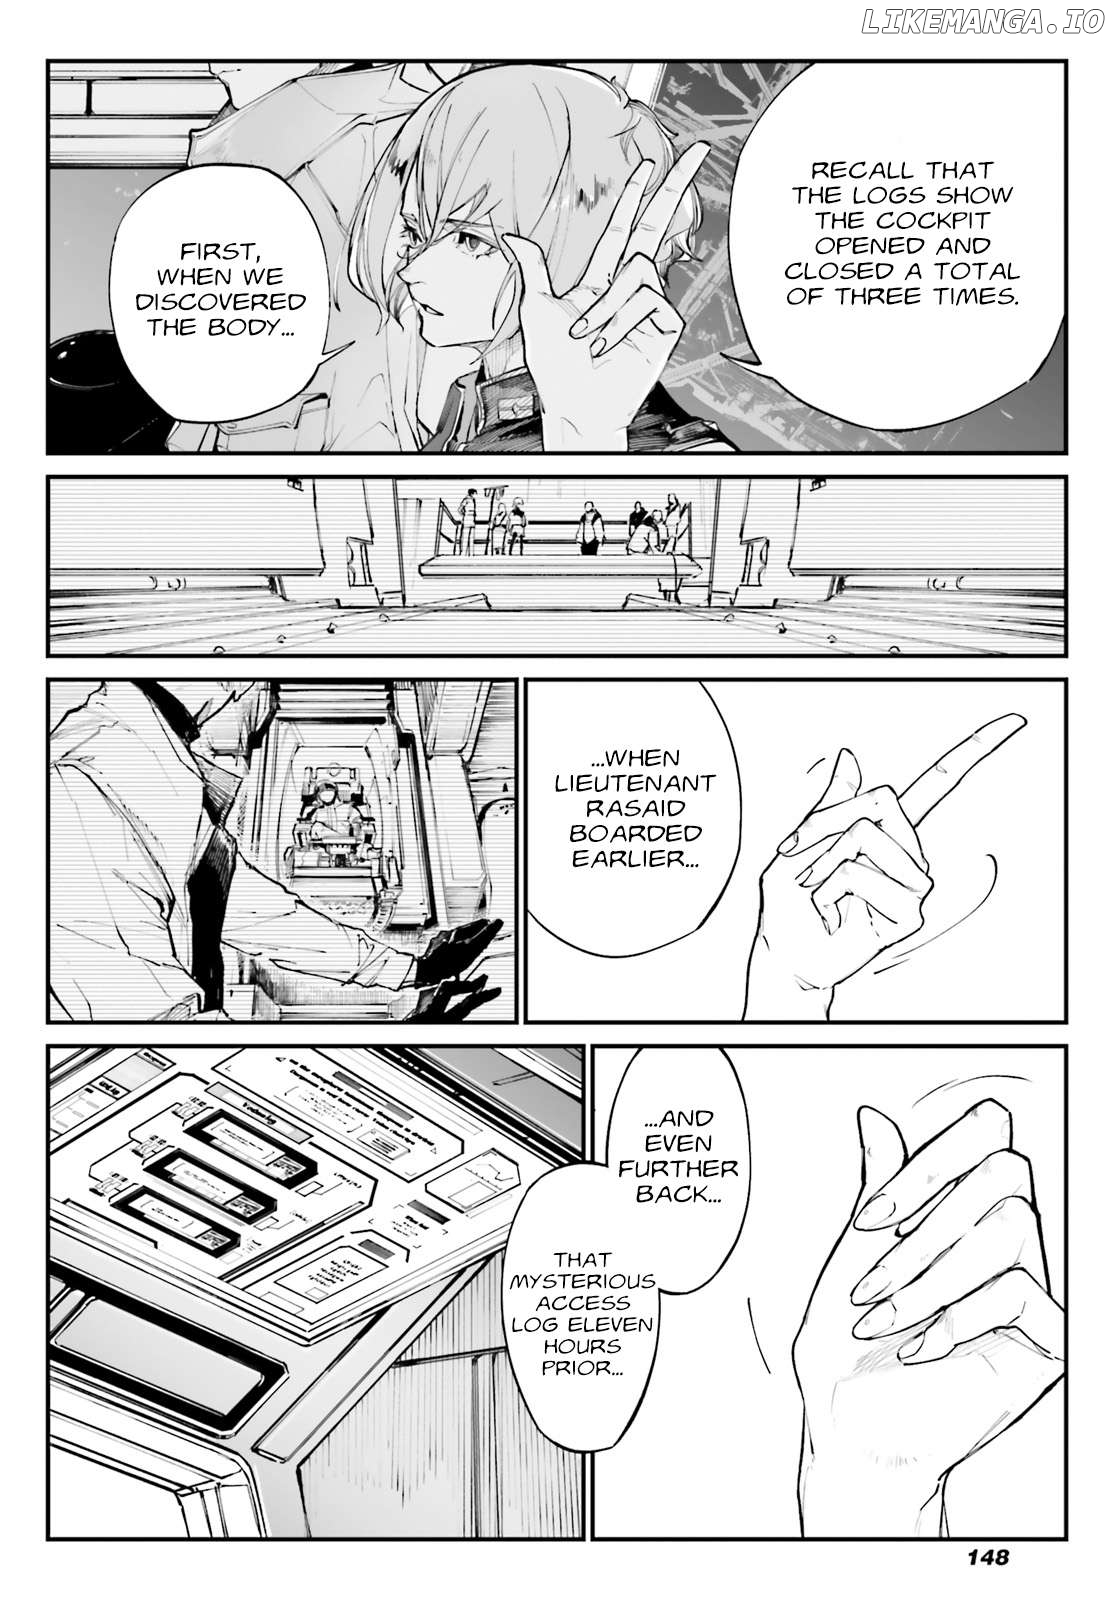 Mobile Suit Gundam Wearwolf Chapter 7 - page 6